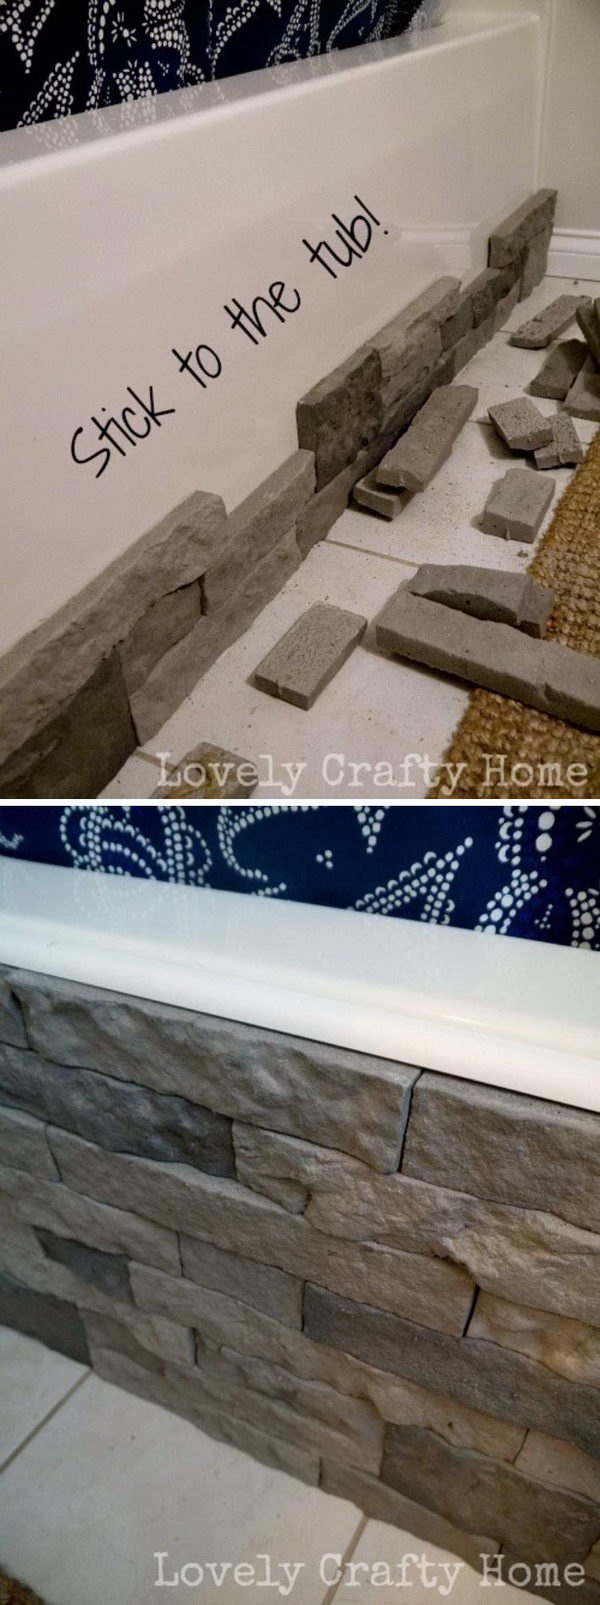 Cover an Ugly Bathtub With Faux Stone. 